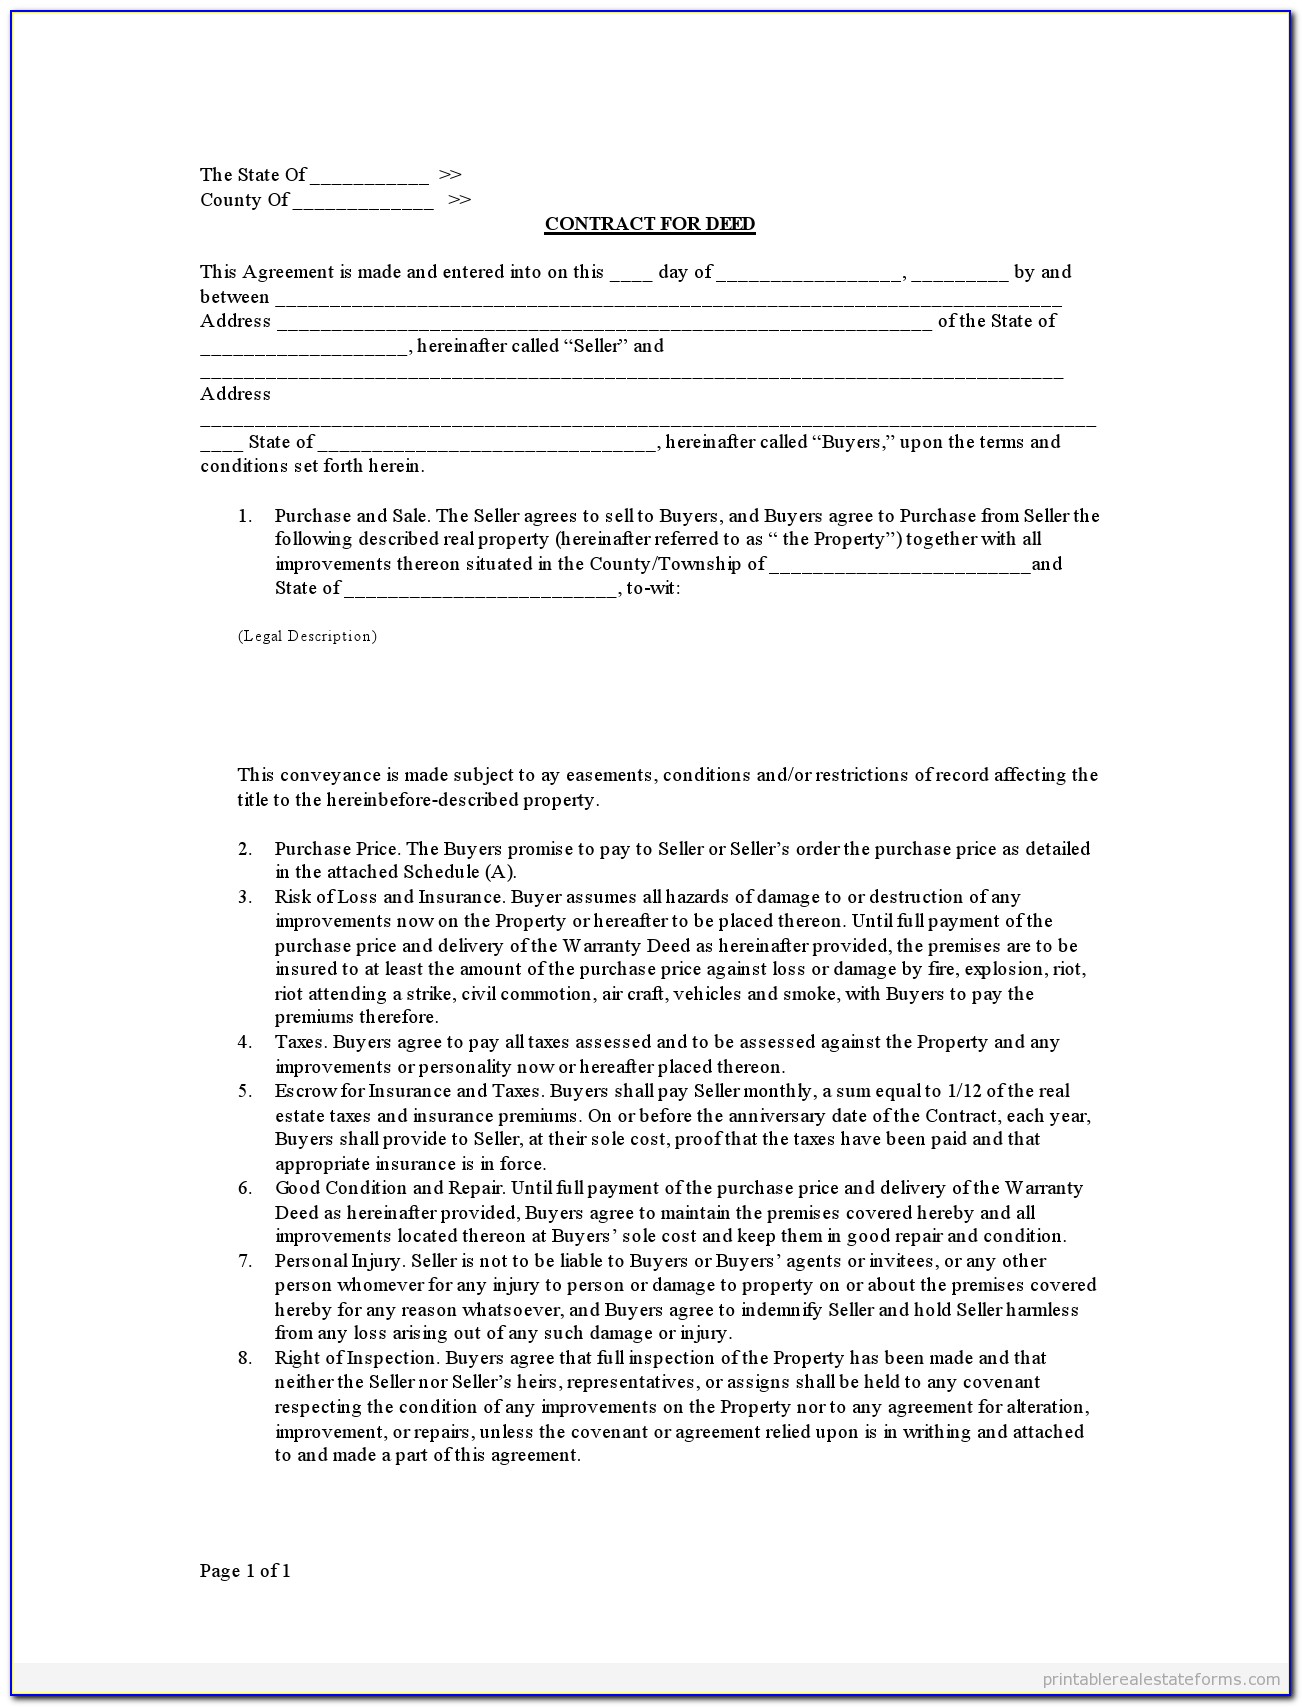 Contract For Deed Texas Form Free